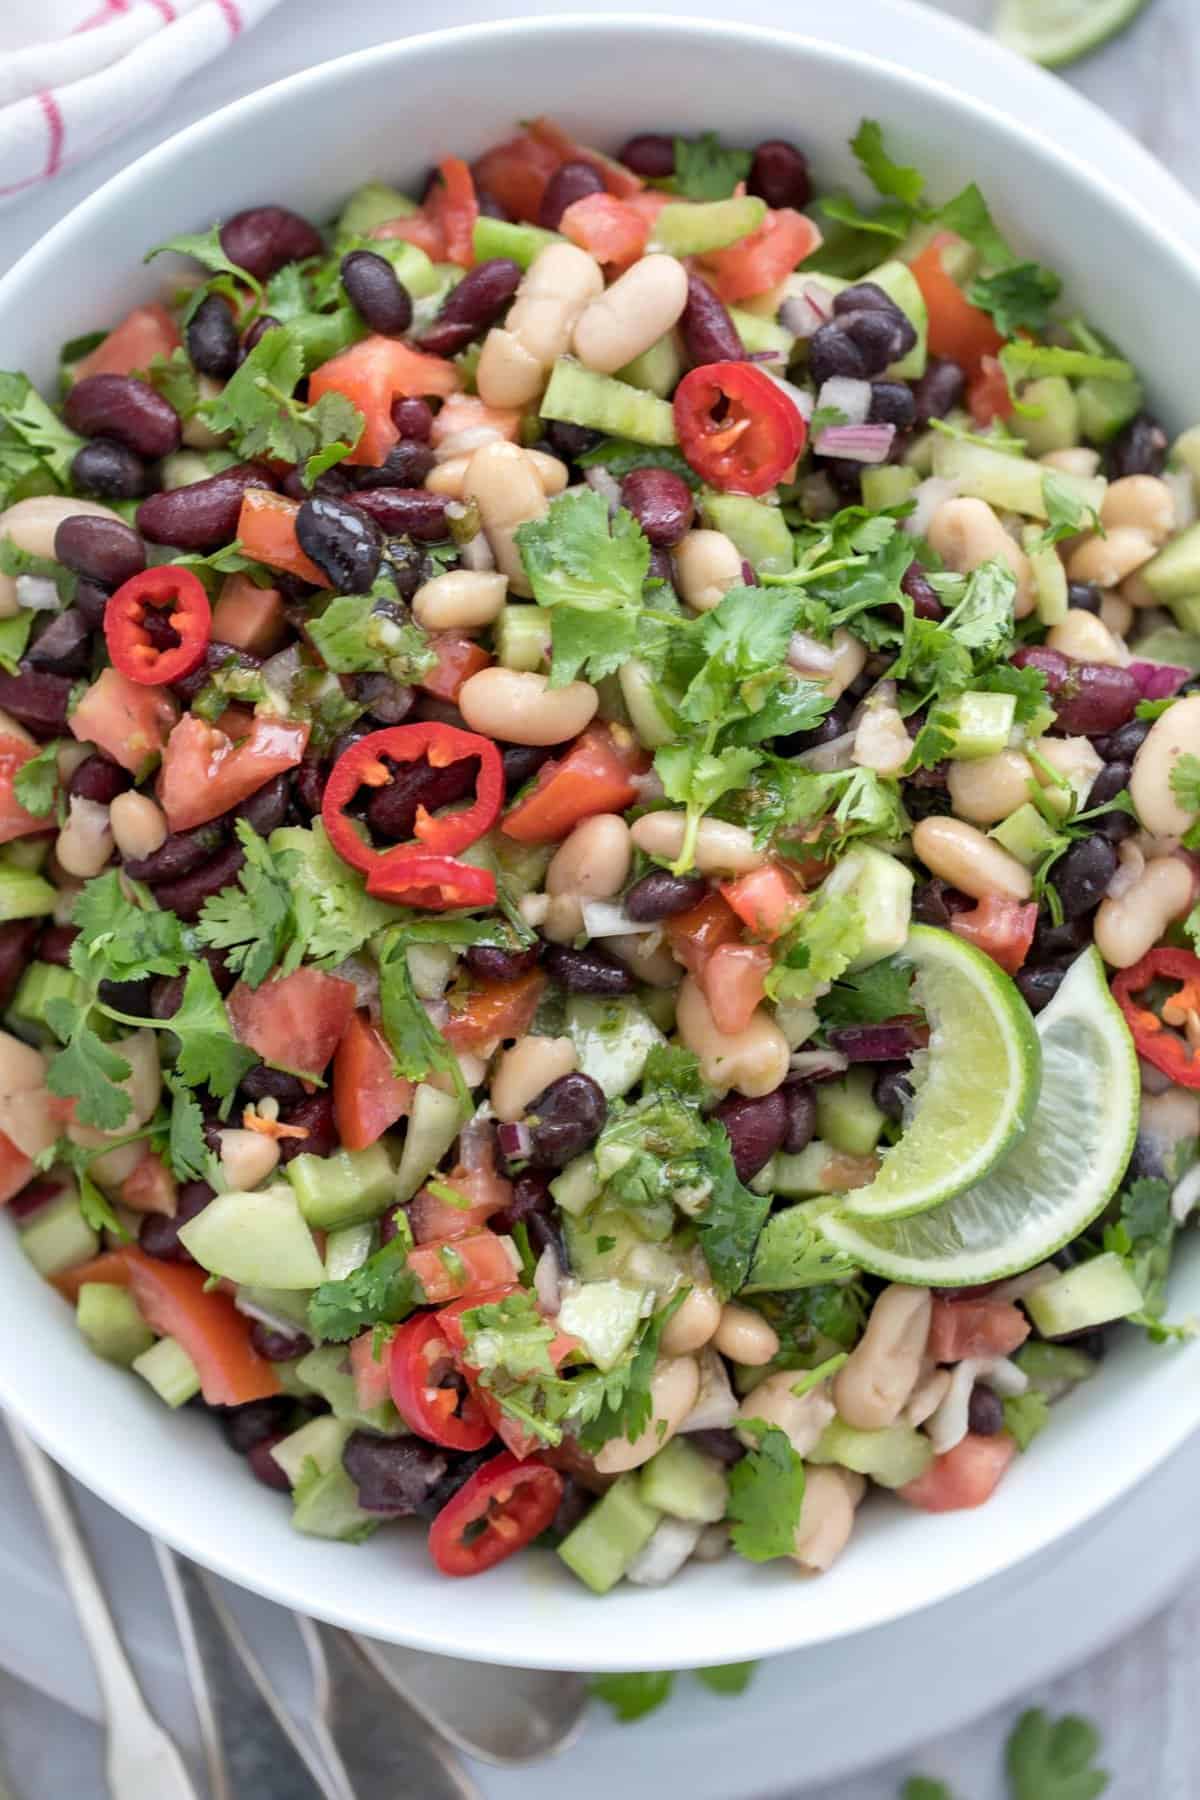 Mexican Bean Salad Recipe - The Harvest Kitchen